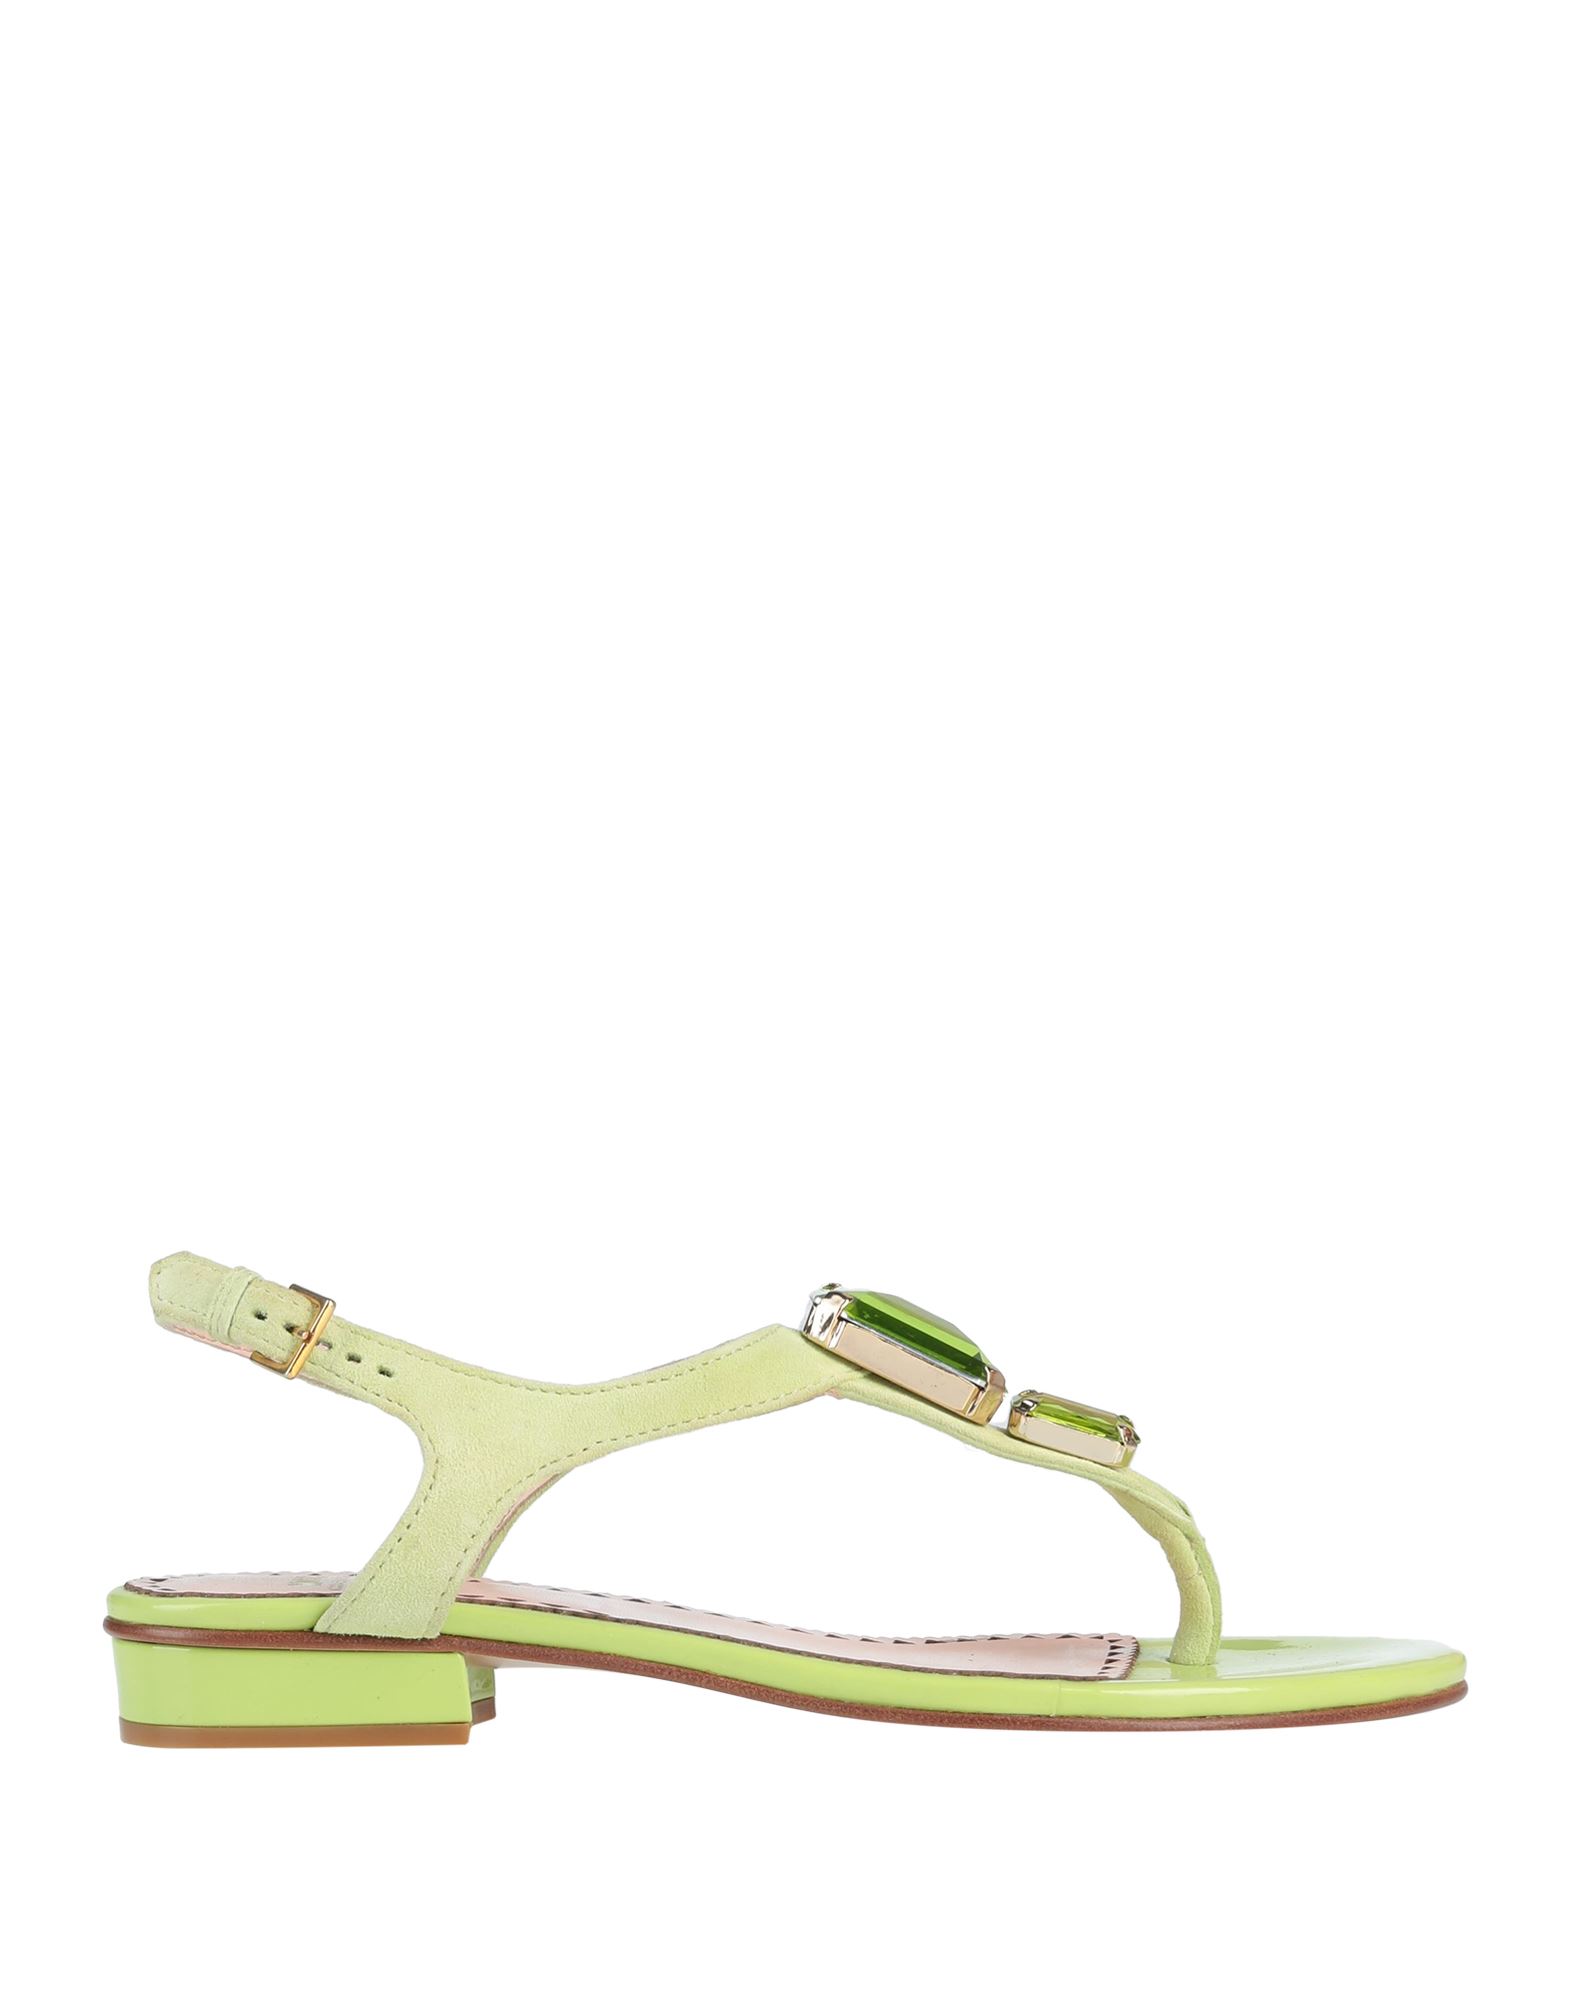 Moschino Cheap And Chic Toe Strap Sandals In Light Green